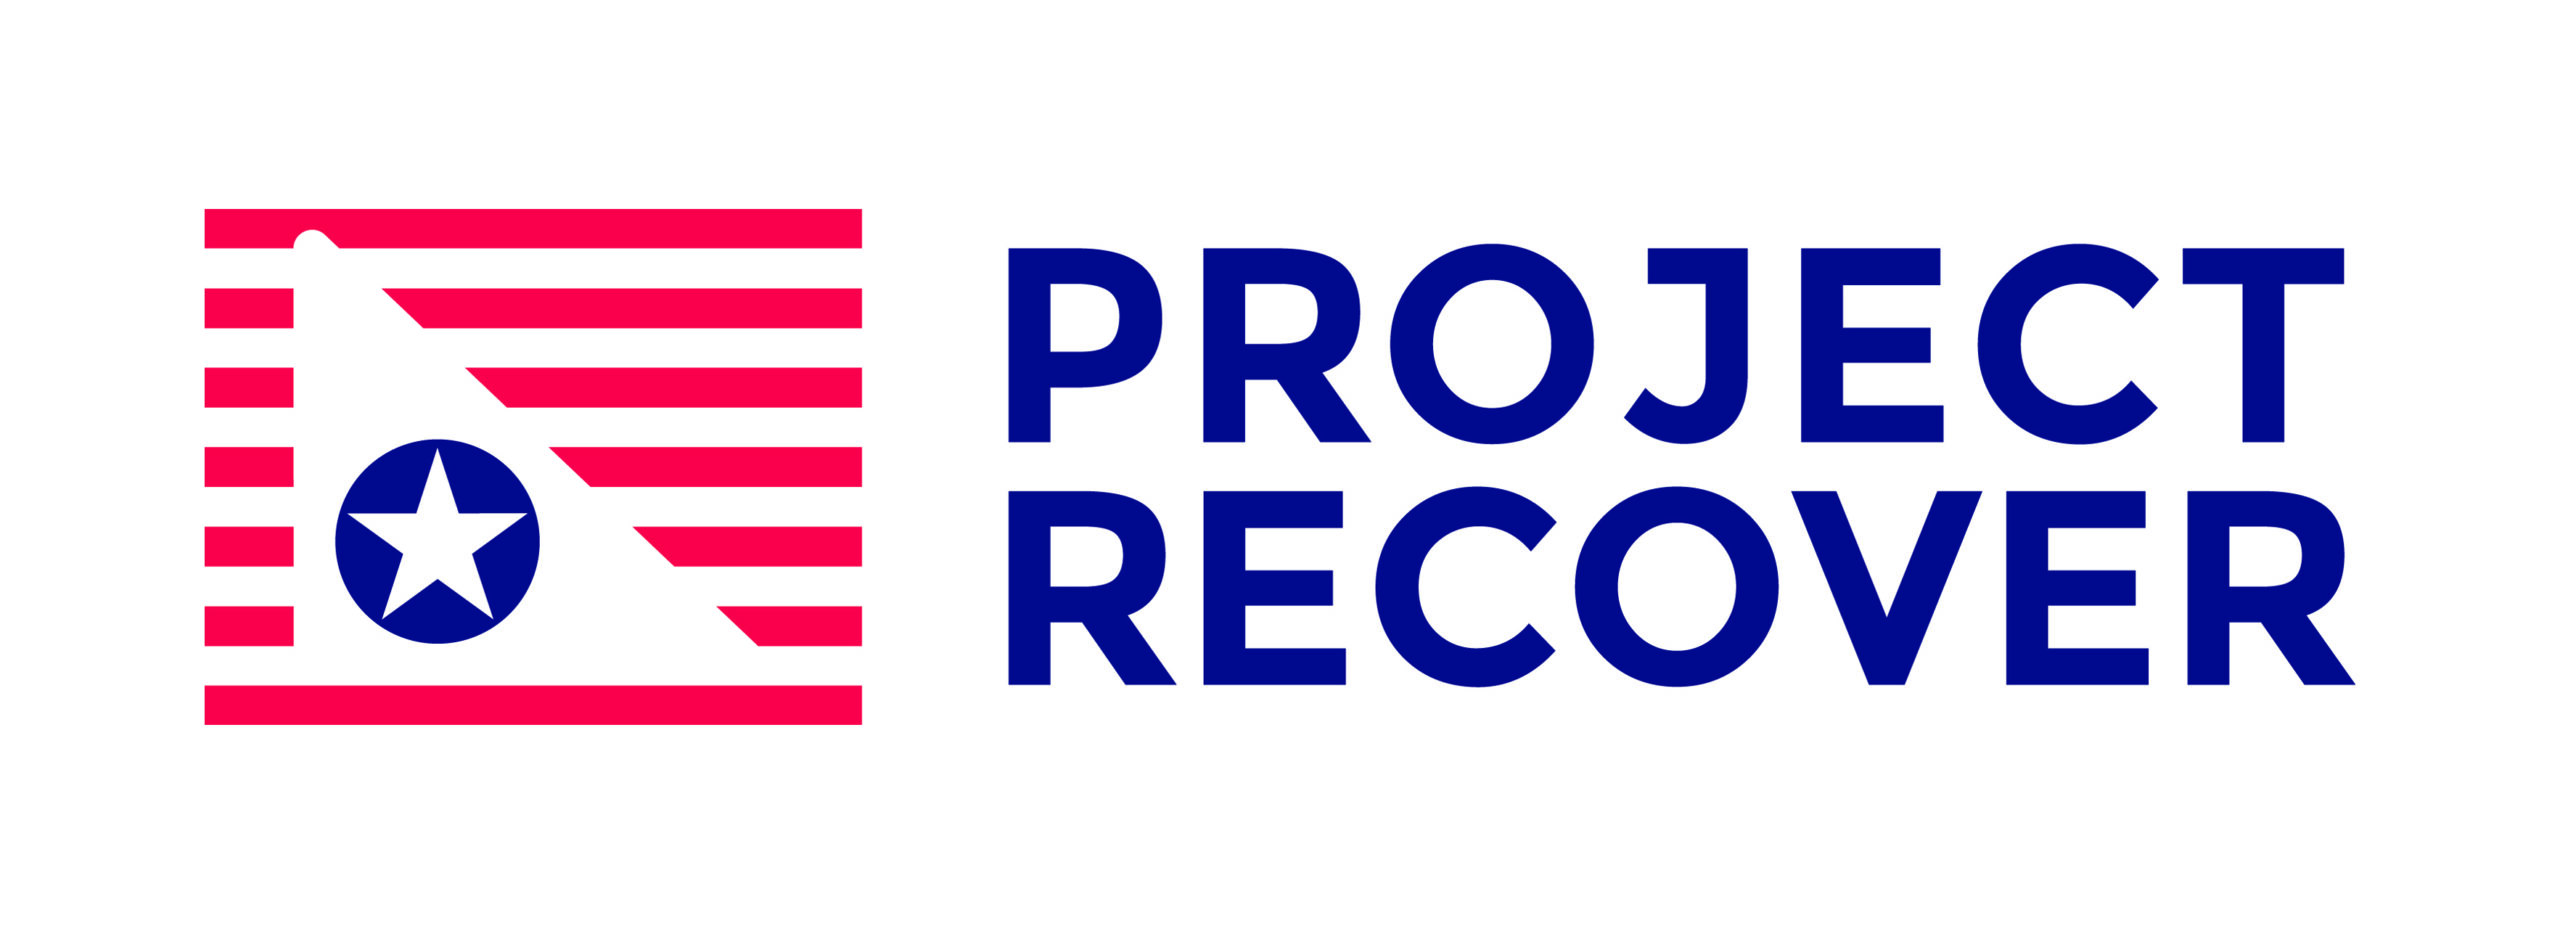 Project Recover Logo